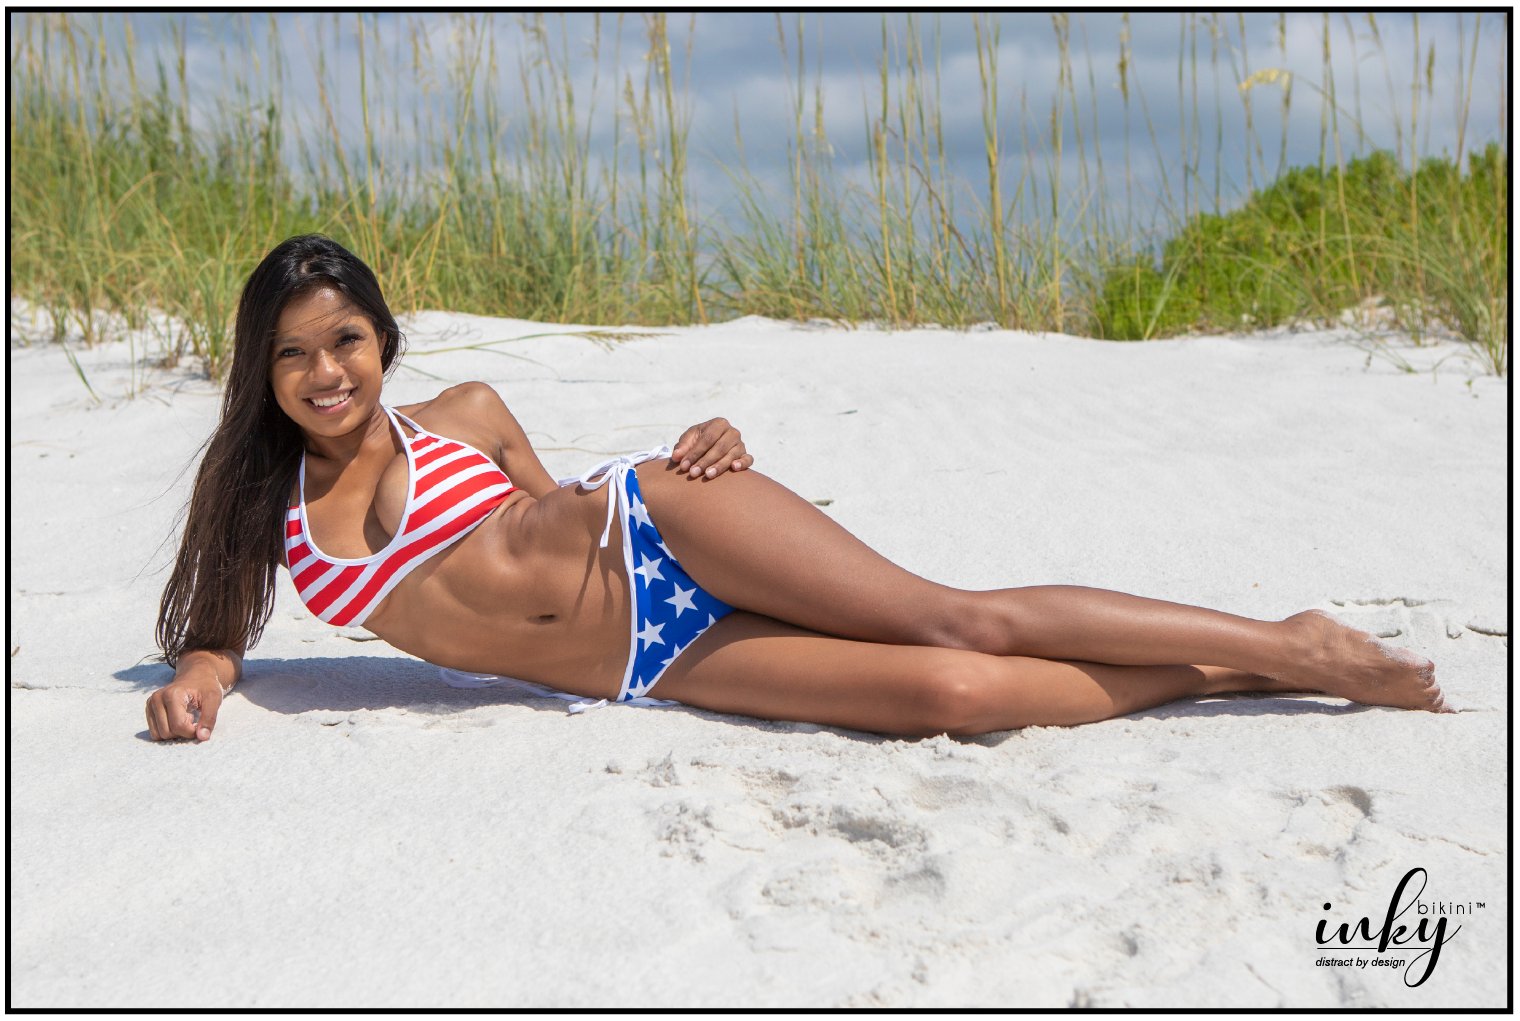 item Ideaal canvas Inky Bikini on Twitter: "You can't go wrong with Stars and Stripes!  Distract by Design! Exclusively at https://t.co/cxChzaFLyB Model:  @tatianna_latina #america #USA #flag #starsandstripes #swimwear #swimsuit  #reversibleswimwear #beachlife #model ...